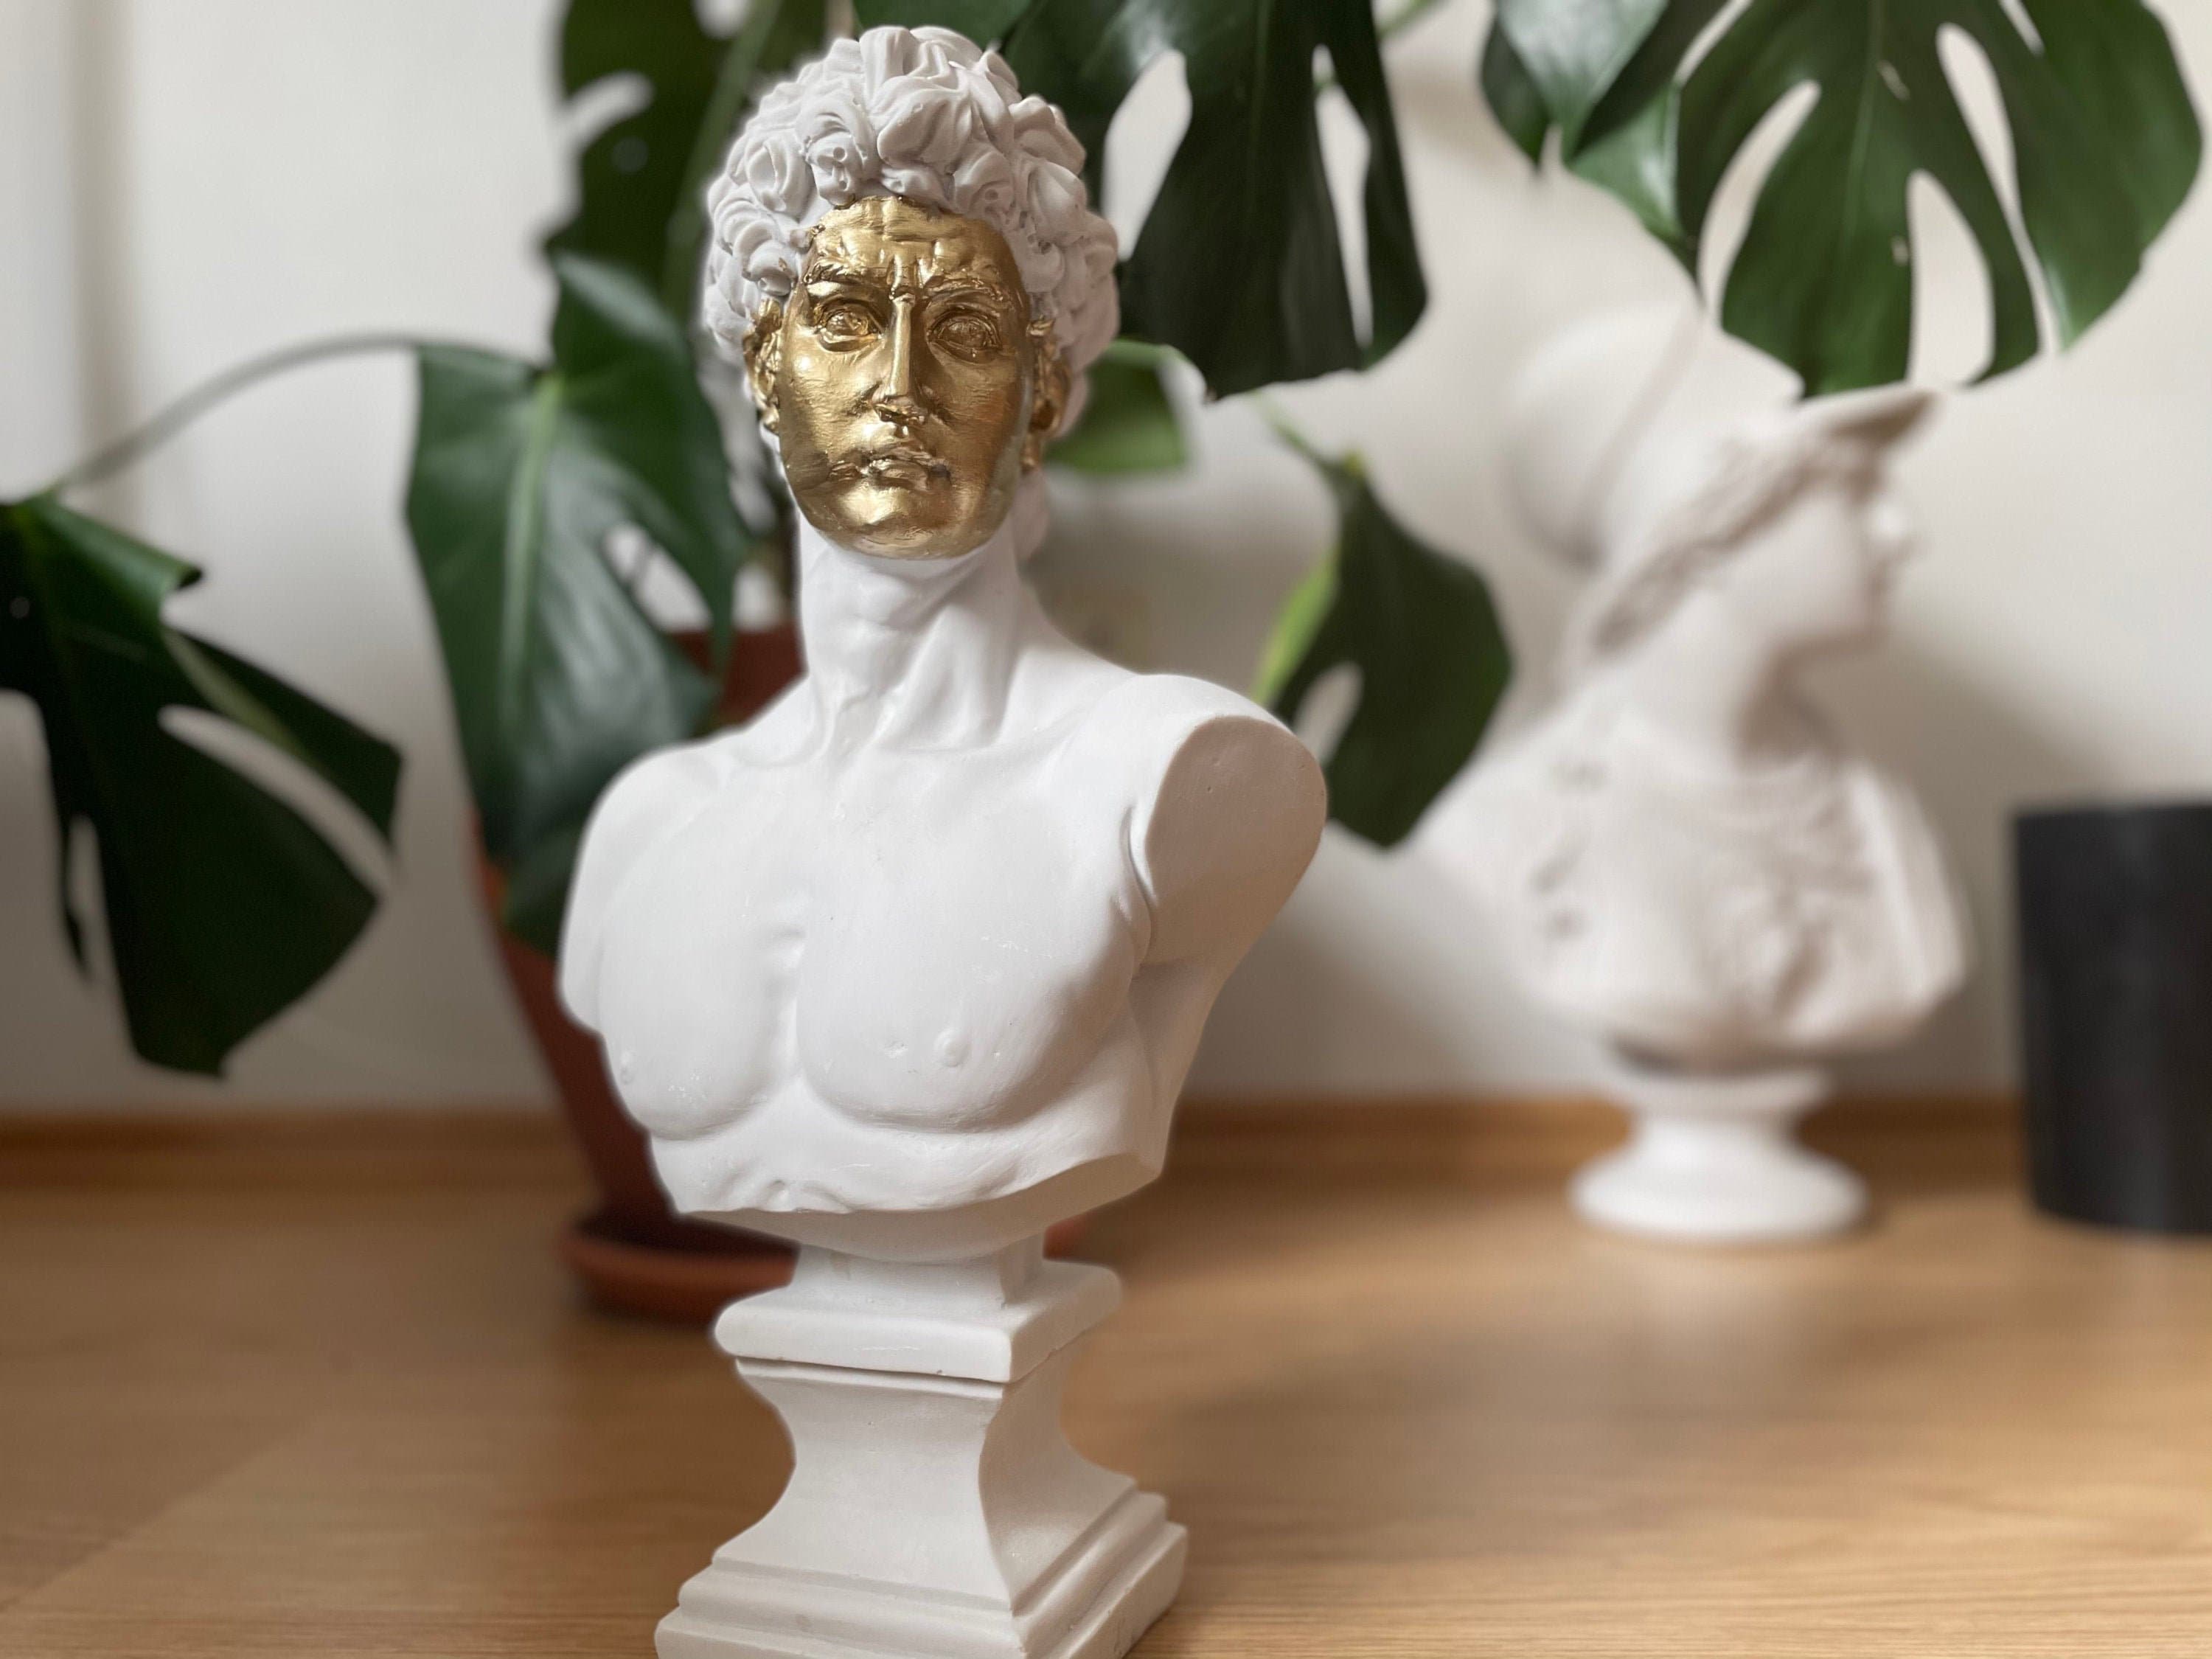 Gilded Classic: Large David Bust Sculpture with Gold Face